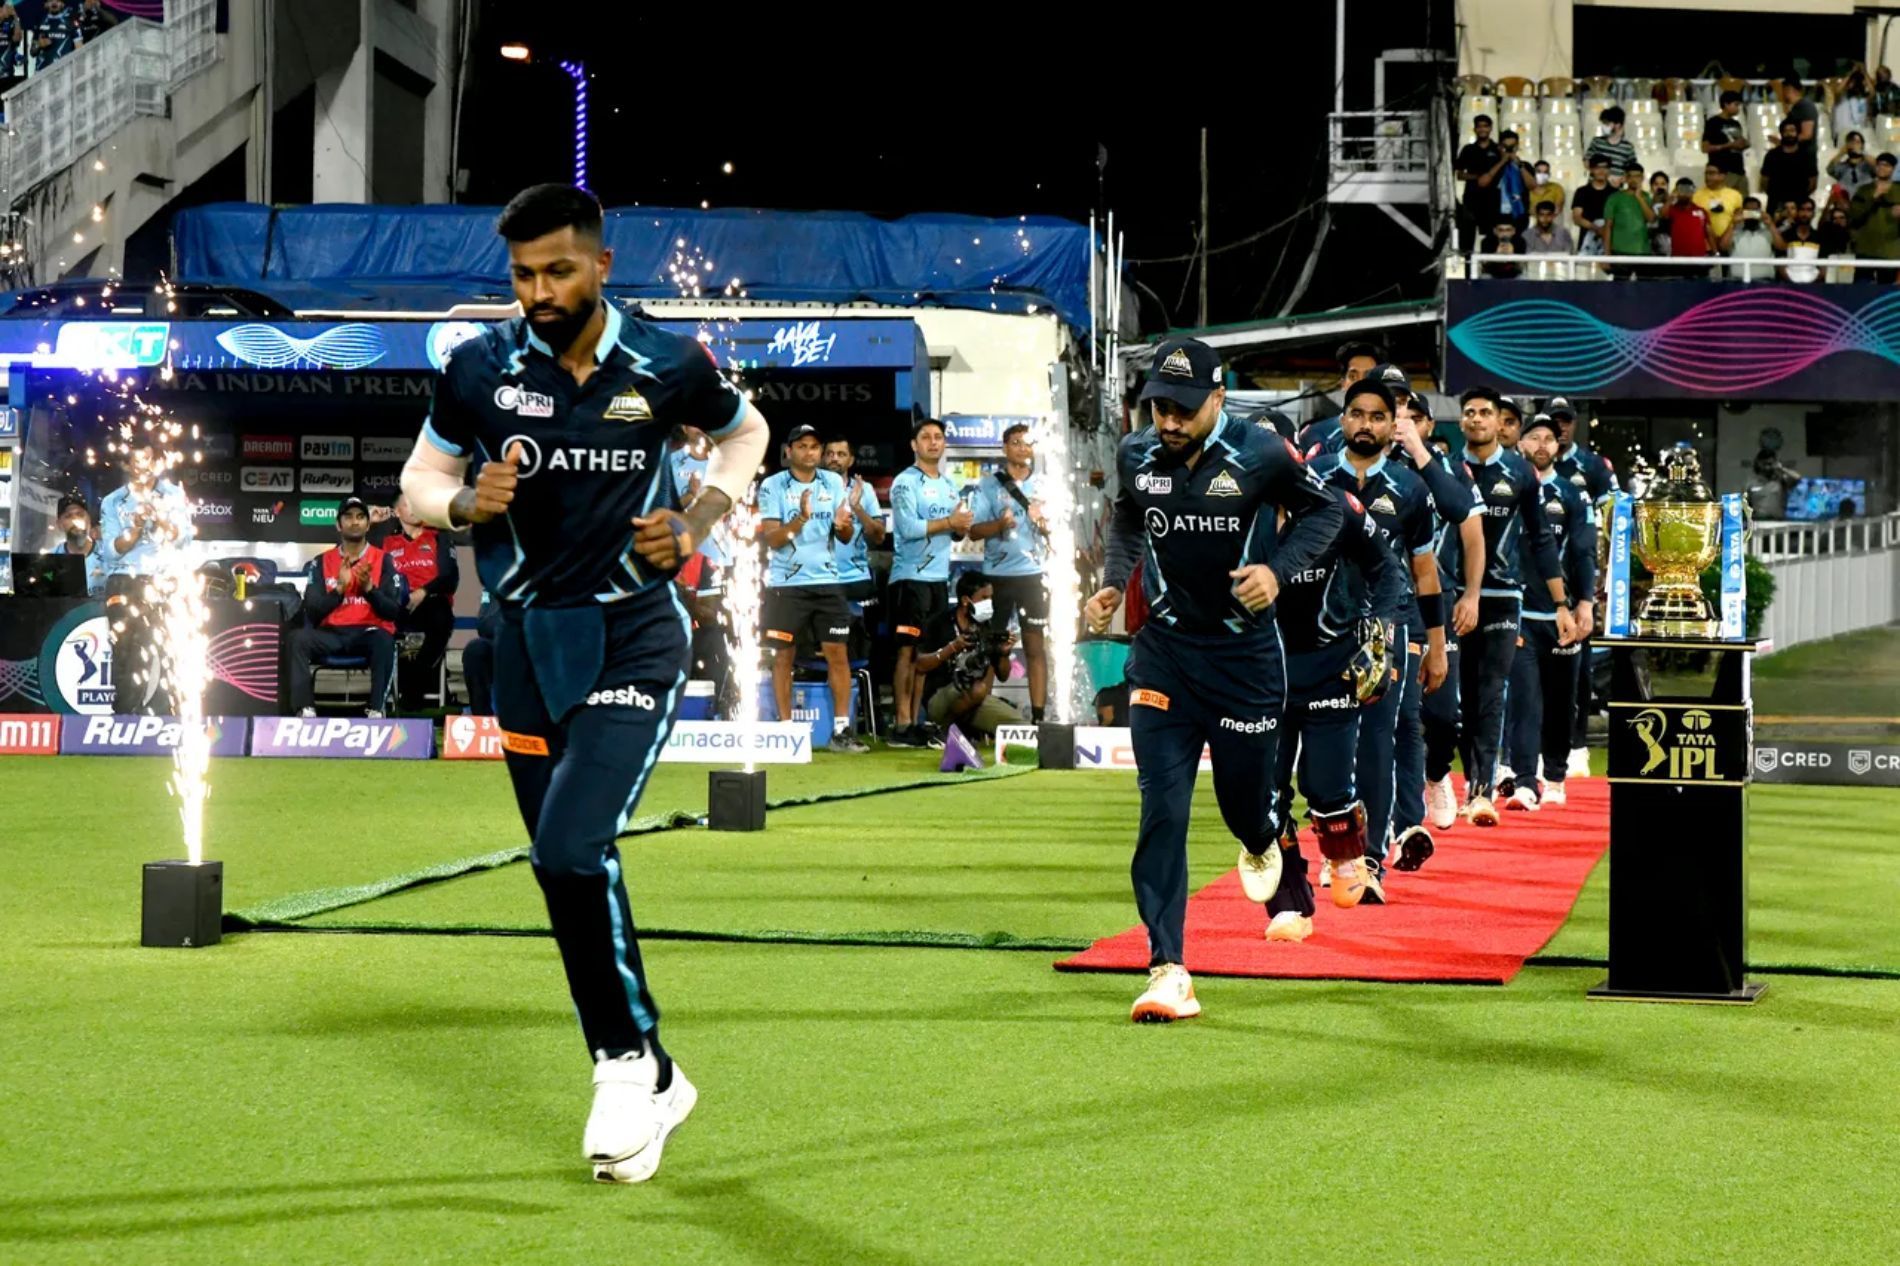 The Gujarat Titans (GT) have reached the IPL 2022 final in their maiden appearance. Pic: IPLT20.COM